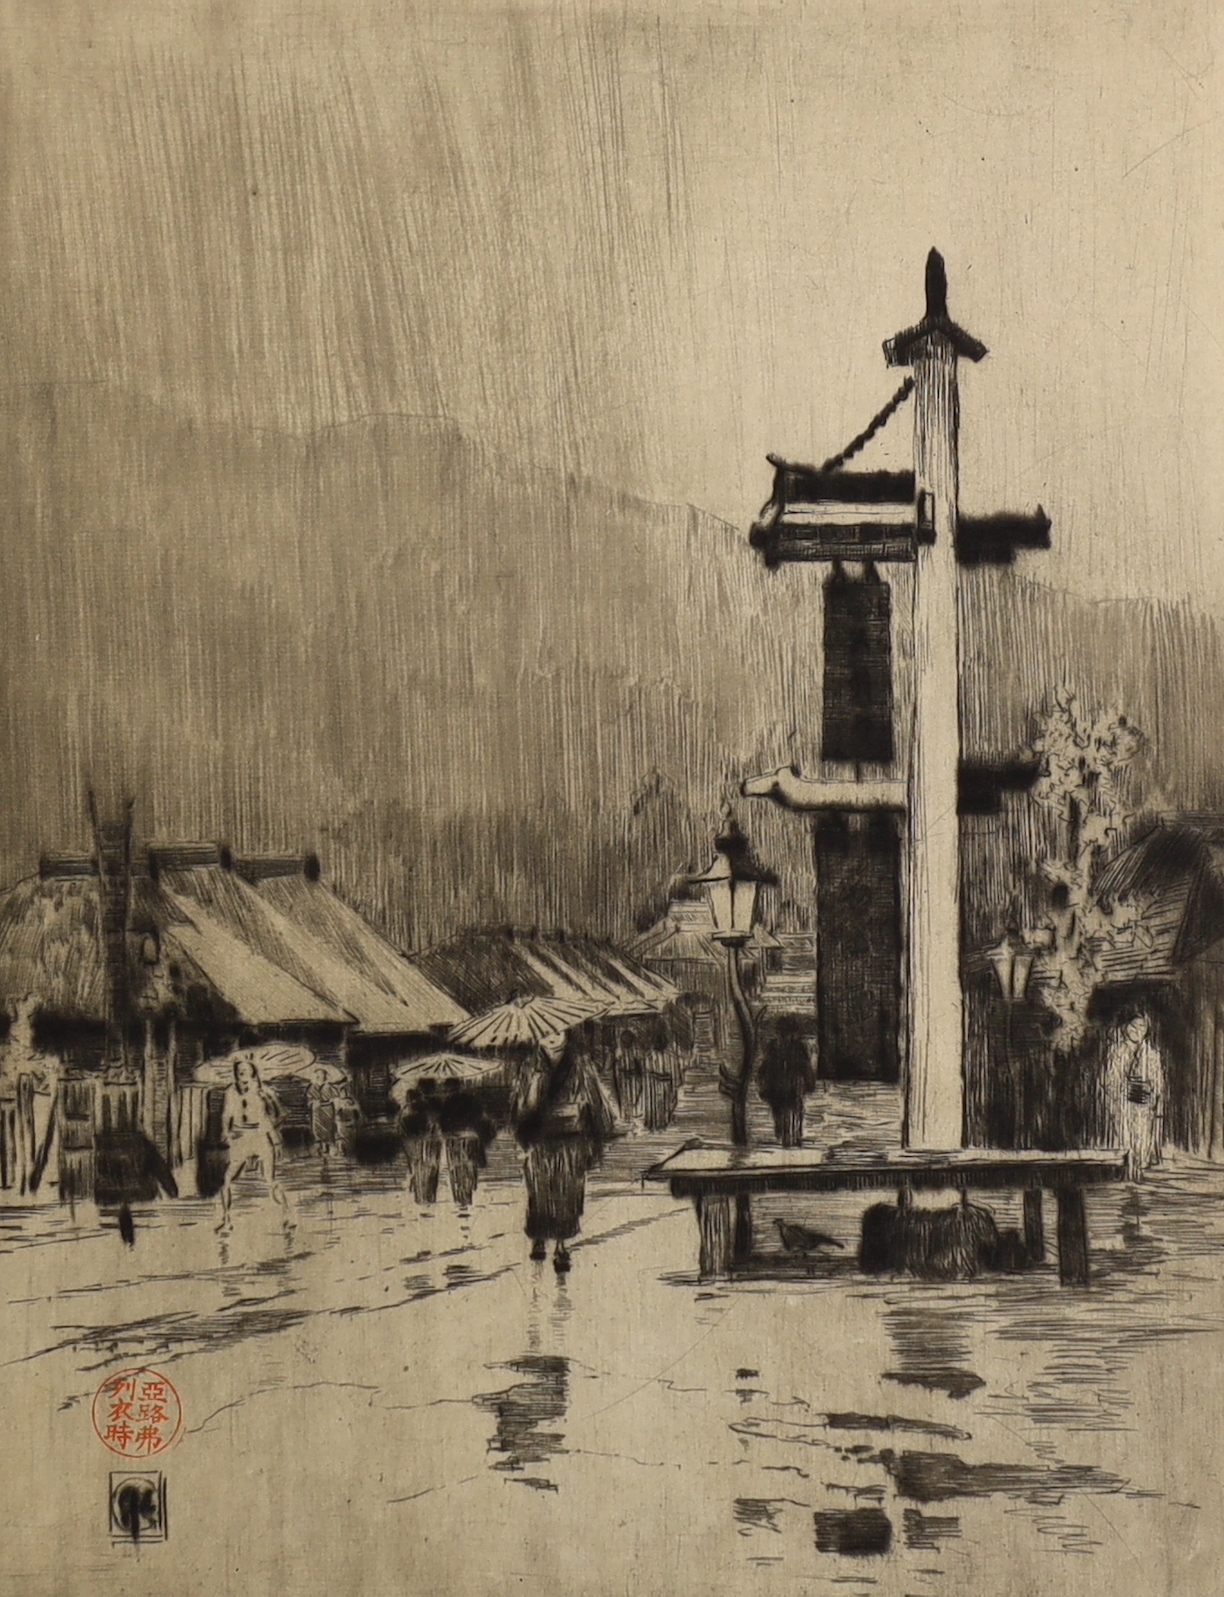 Sir Alfred East (1849-1913), drypoint etching, 'A Wet Day at Hakone', signed in pencil, 22.5 x 17.5cm, unframed